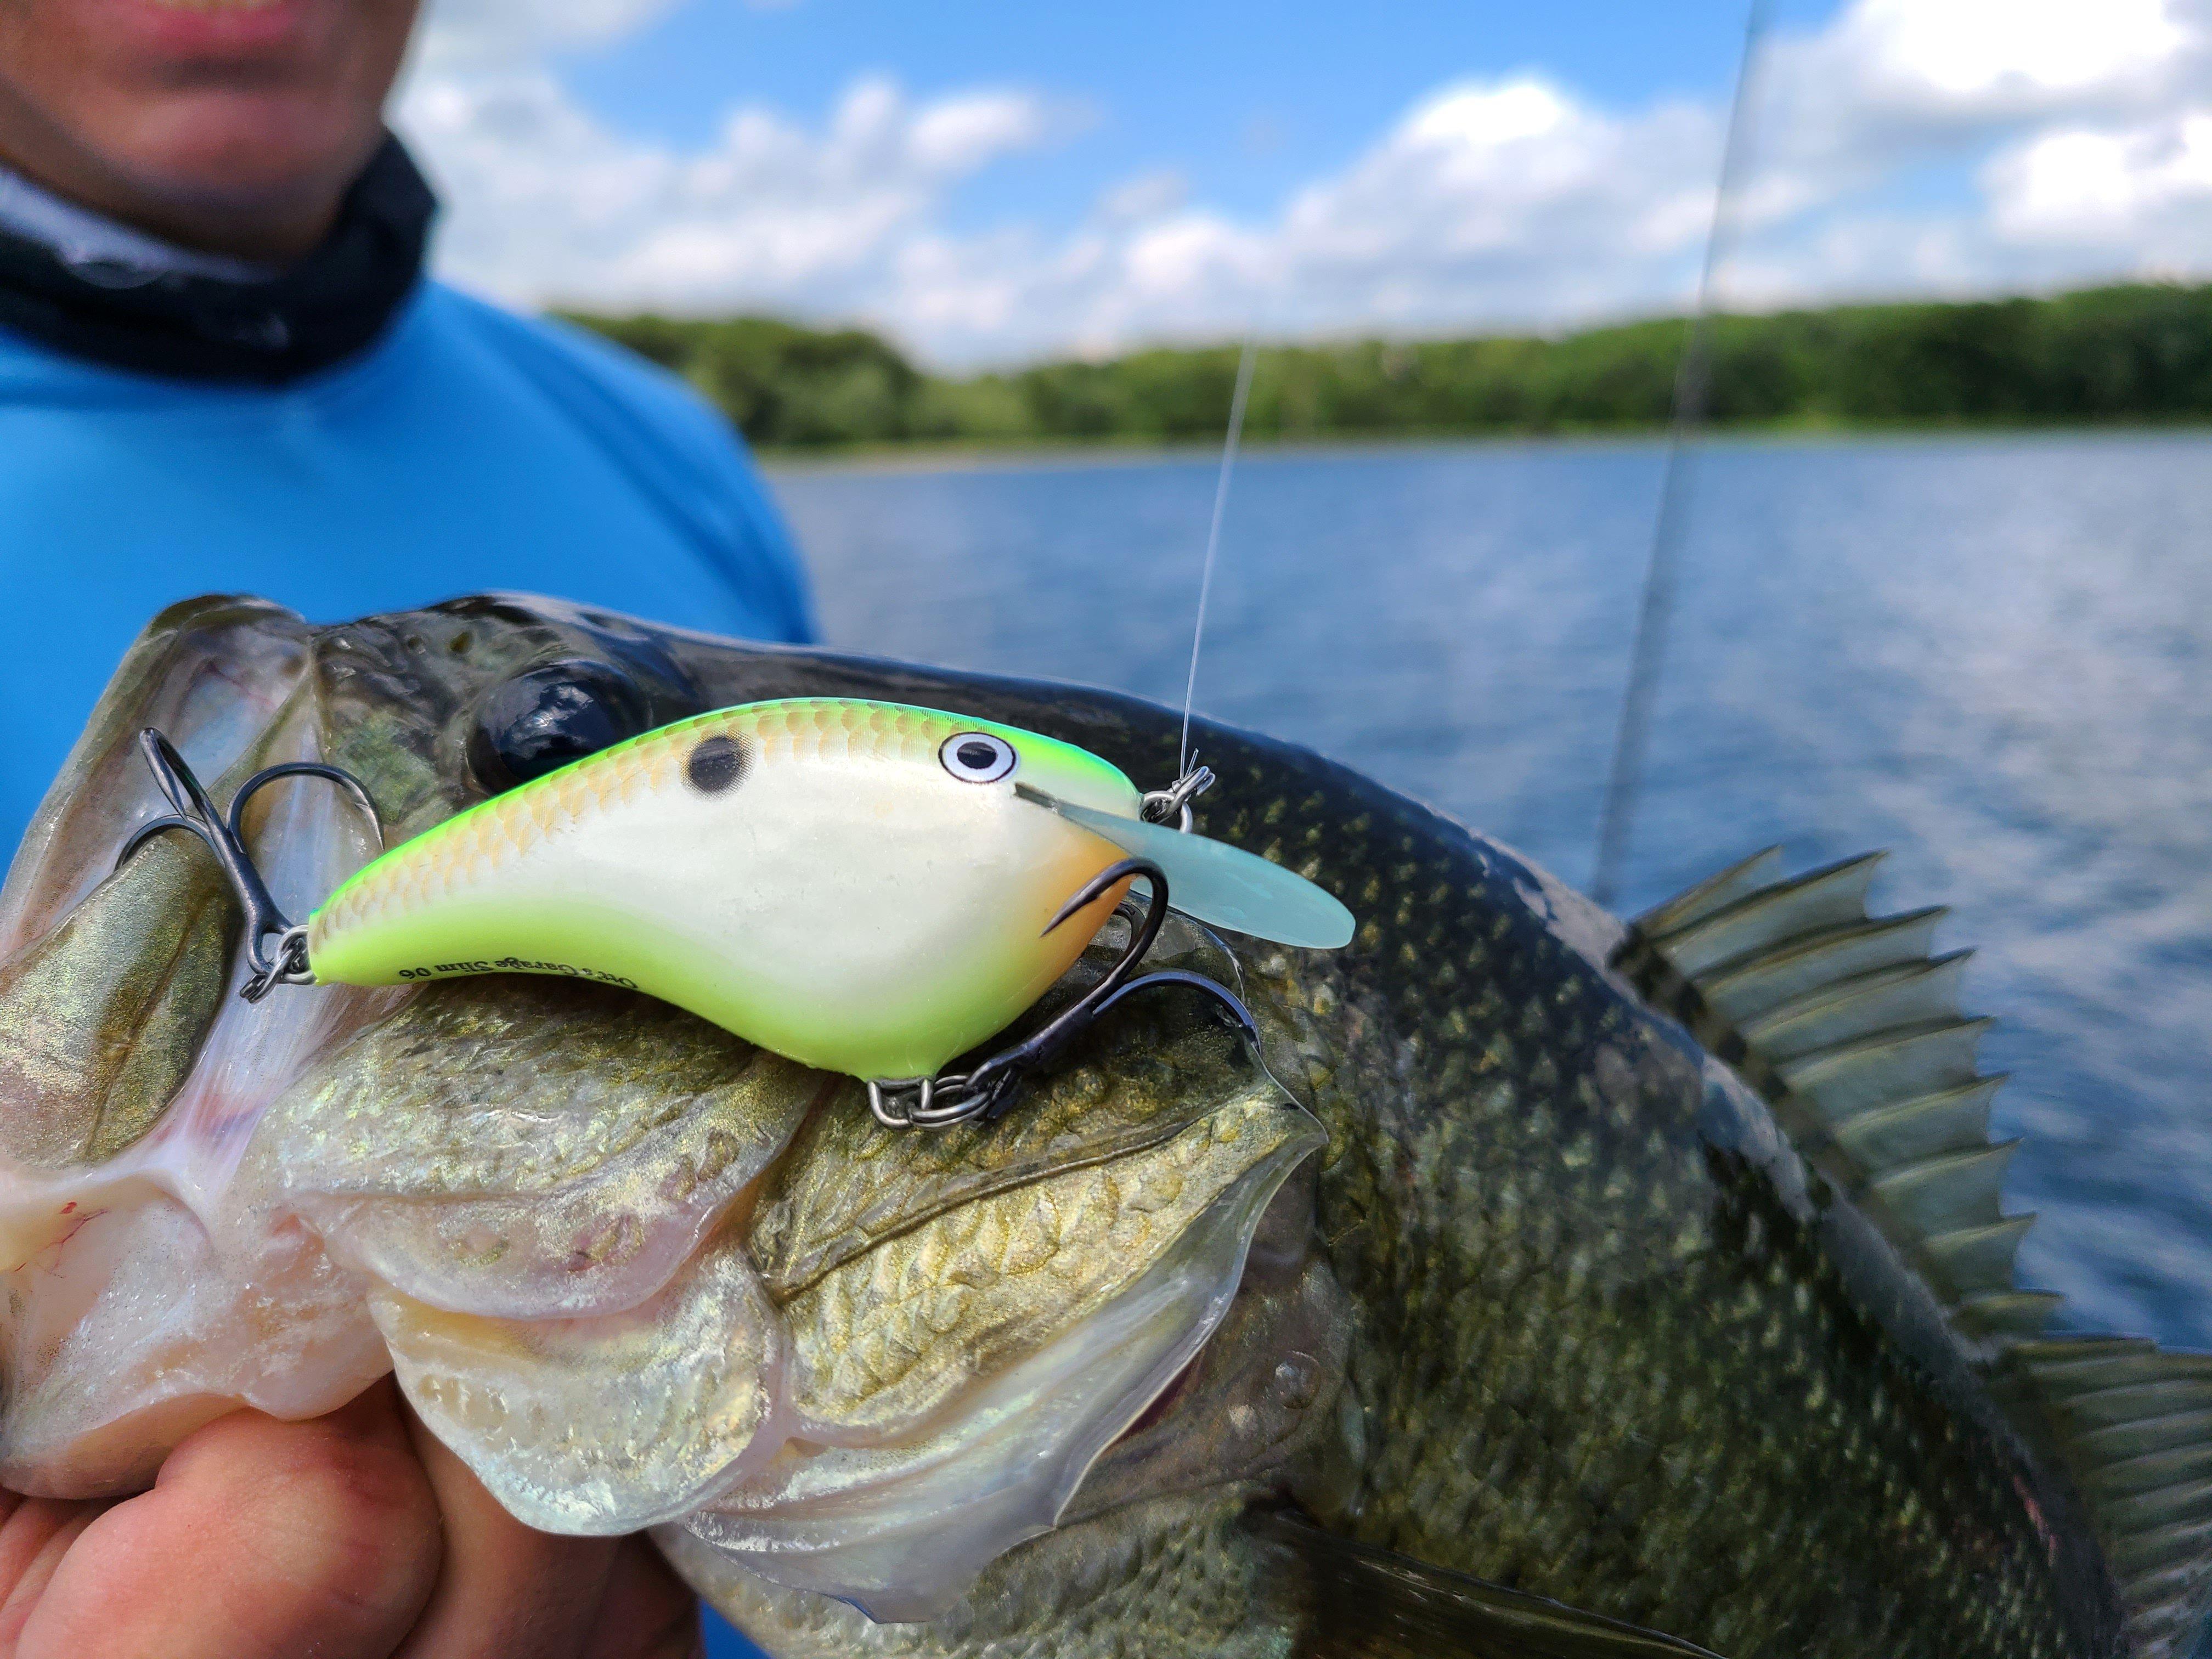 Flat-sided crankbaits mimic dying shad, a favorite food of early spring bass. Image by Rapala